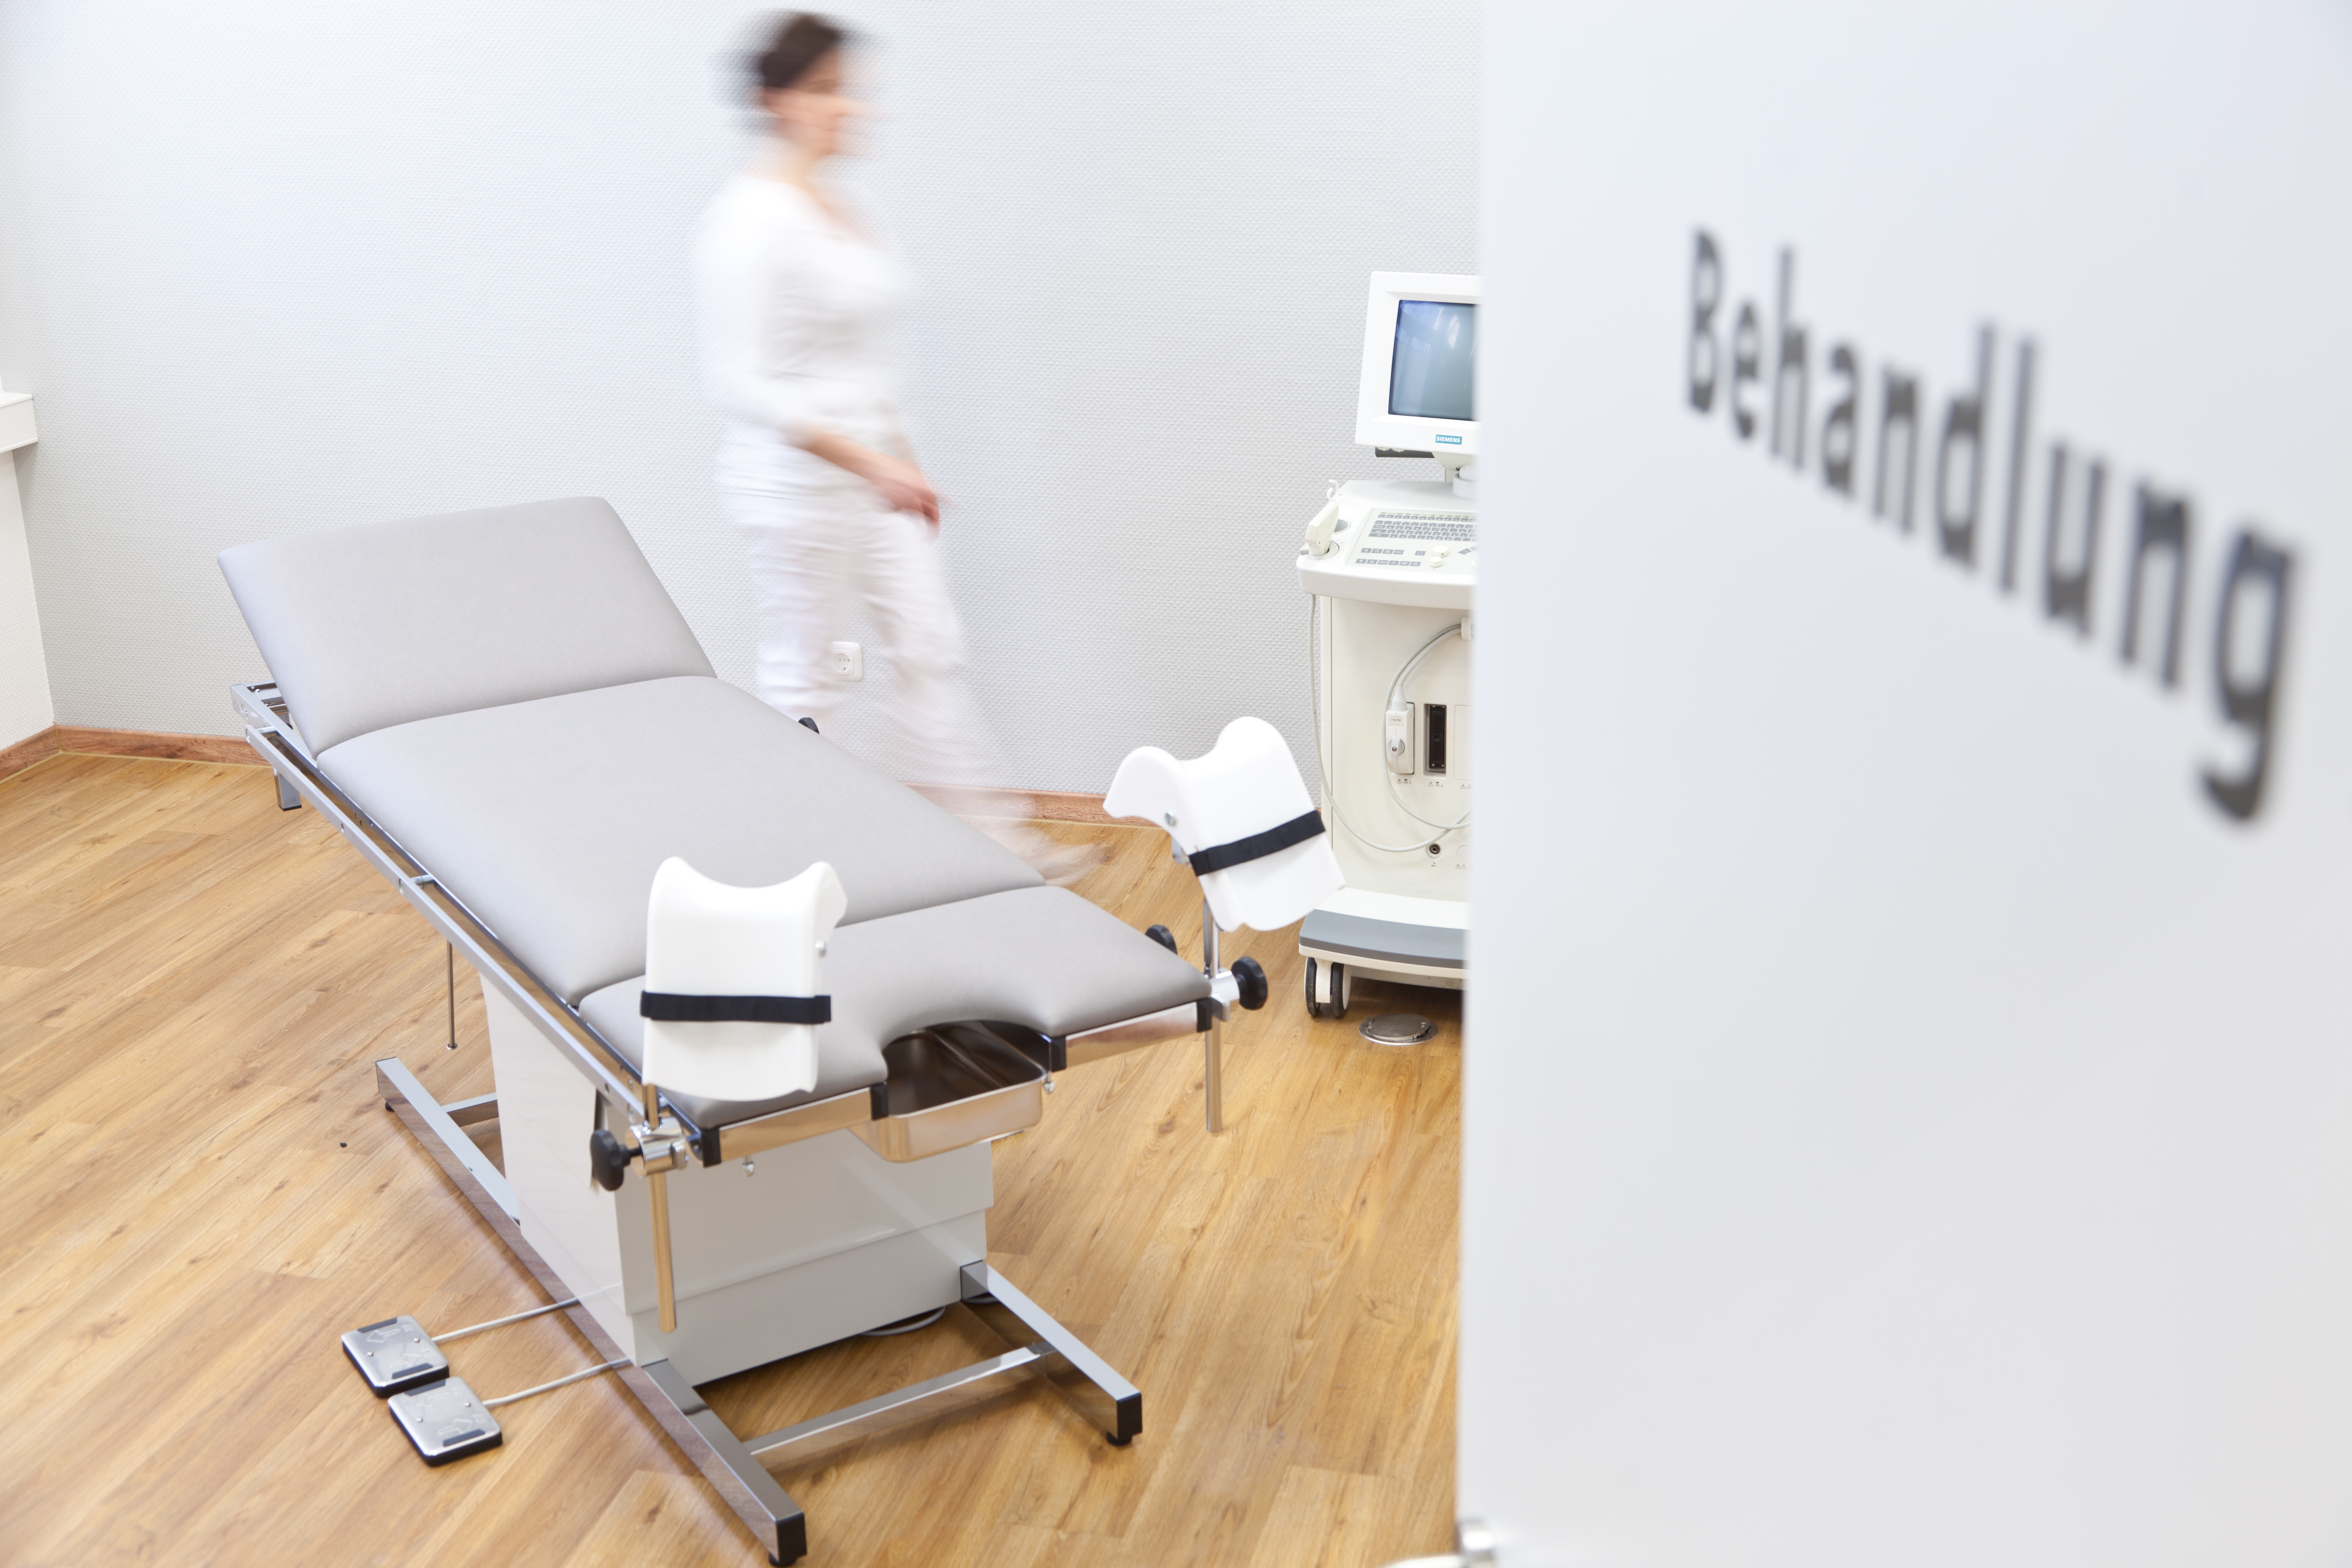 Multi-function examination table in the doctor's treatment room